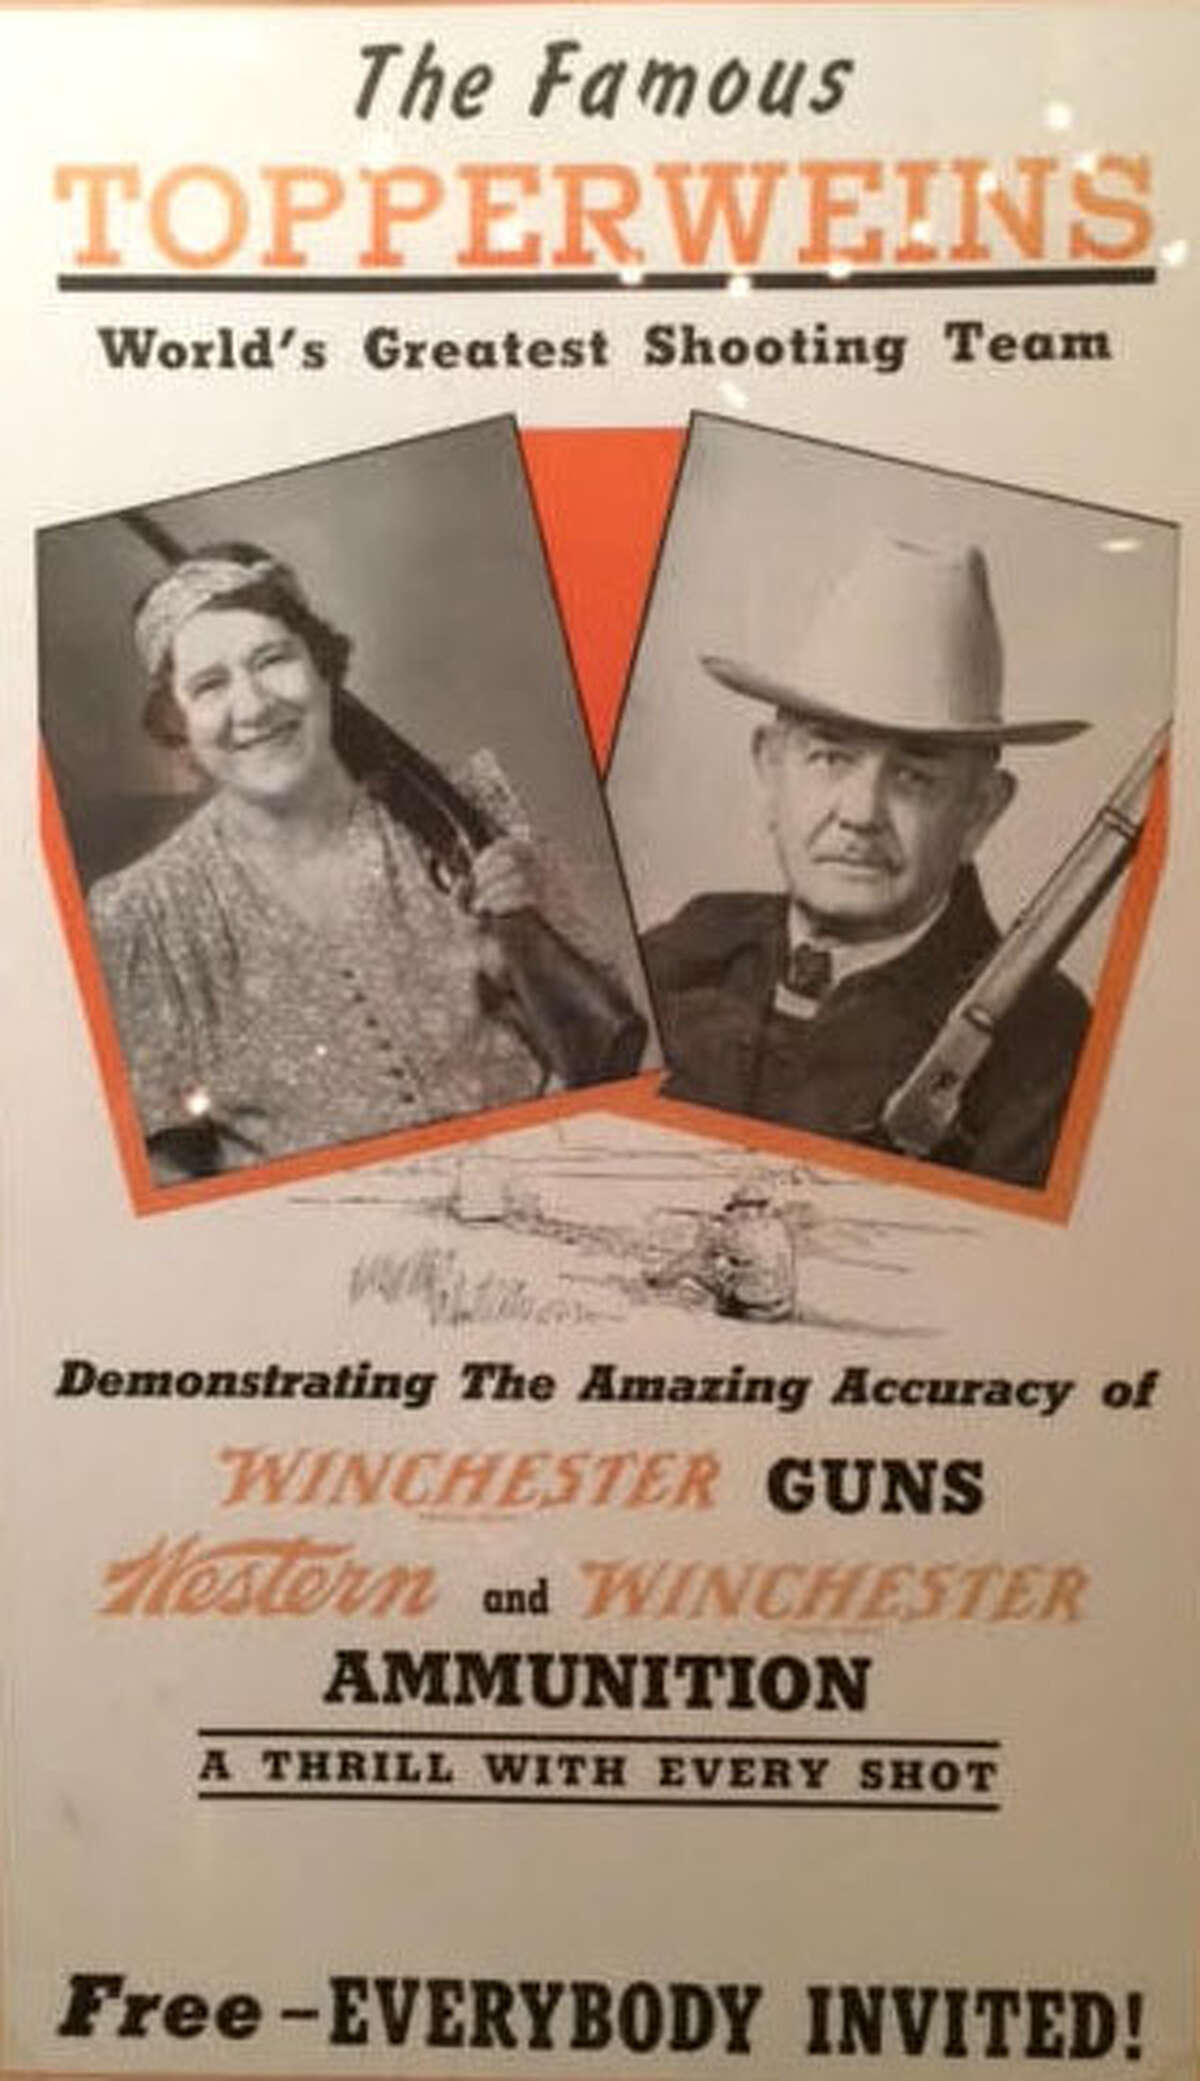 This Buckhorn Museum poster of the “Topperweins” (with the first e dropped from their name to appear more American than German) called them the world’s greatest shooting team.